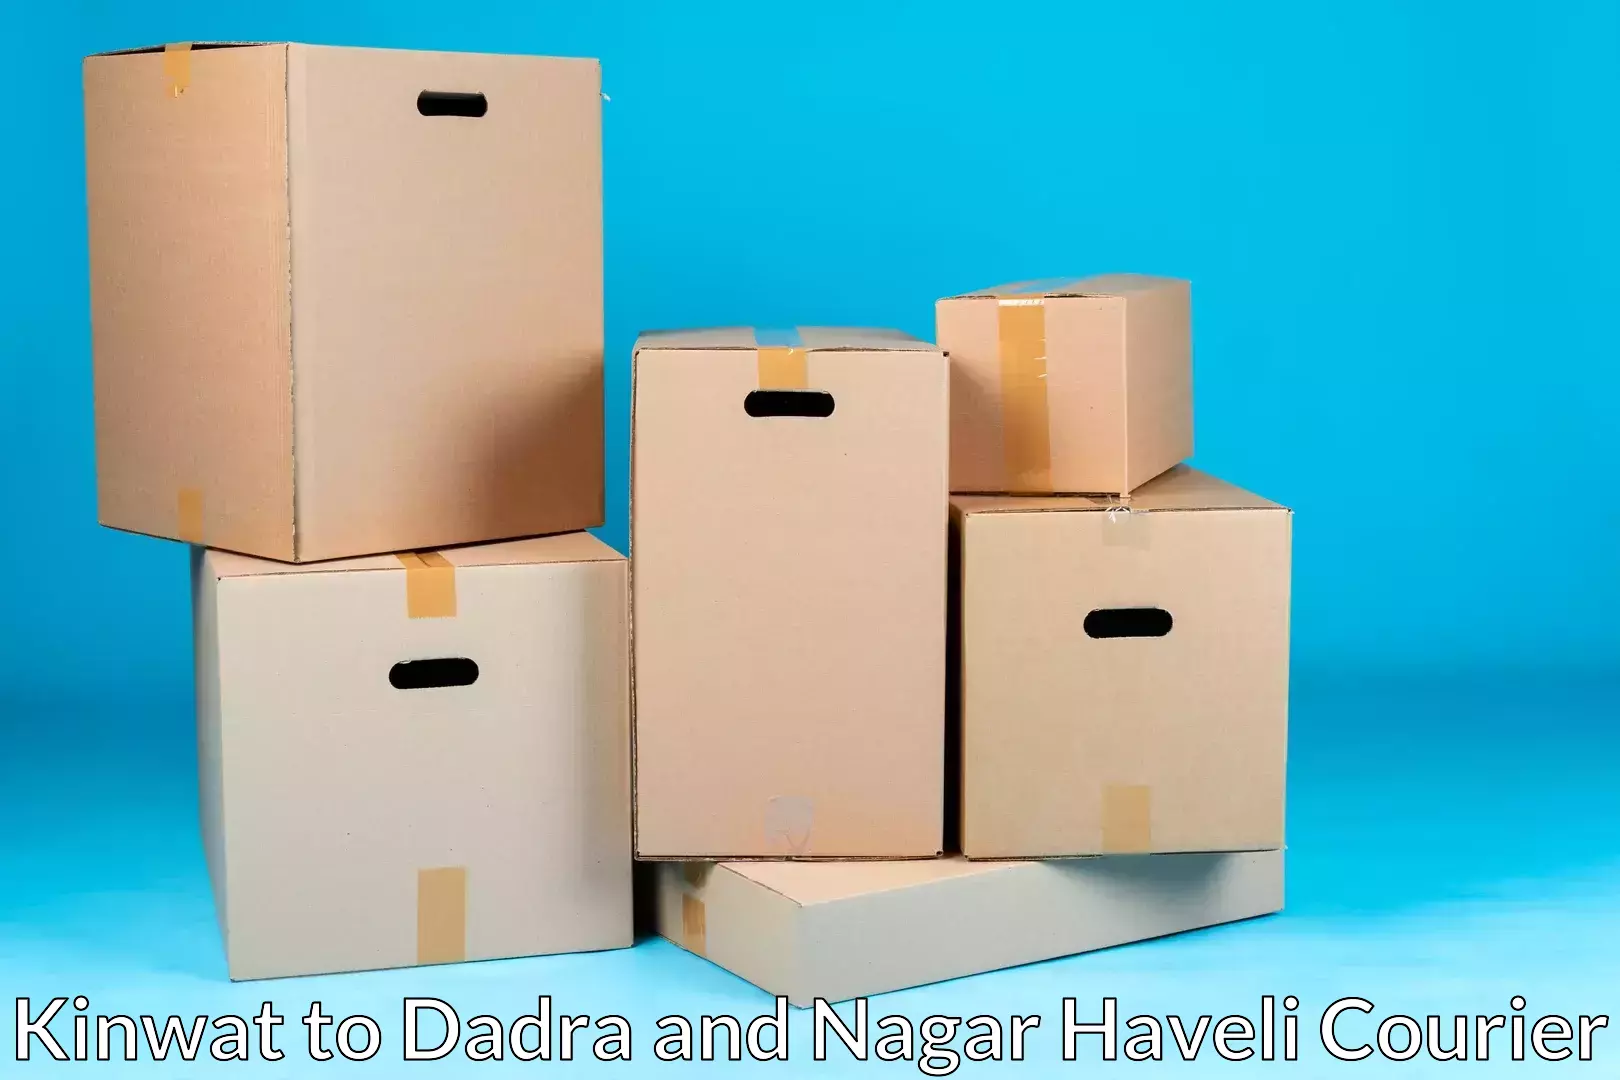 Moving and packing experts in Kinwat to Dadra and Nagar Haveli